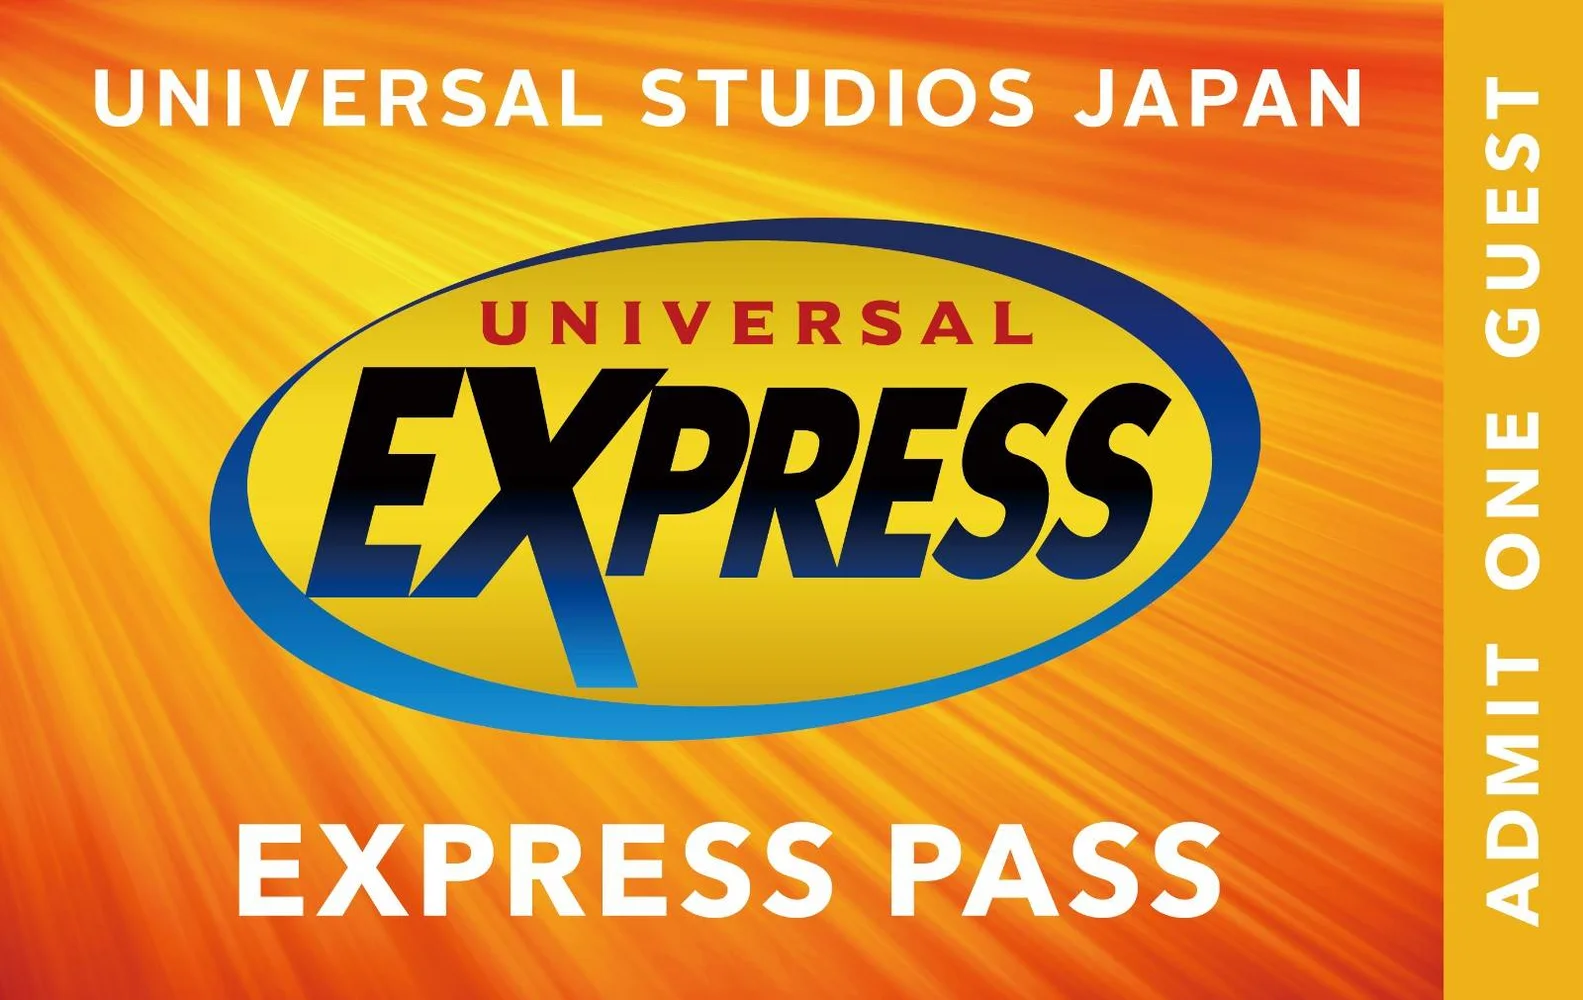 Universal Express Pass 4 — Attack on Titan XR Ride & Backdrop